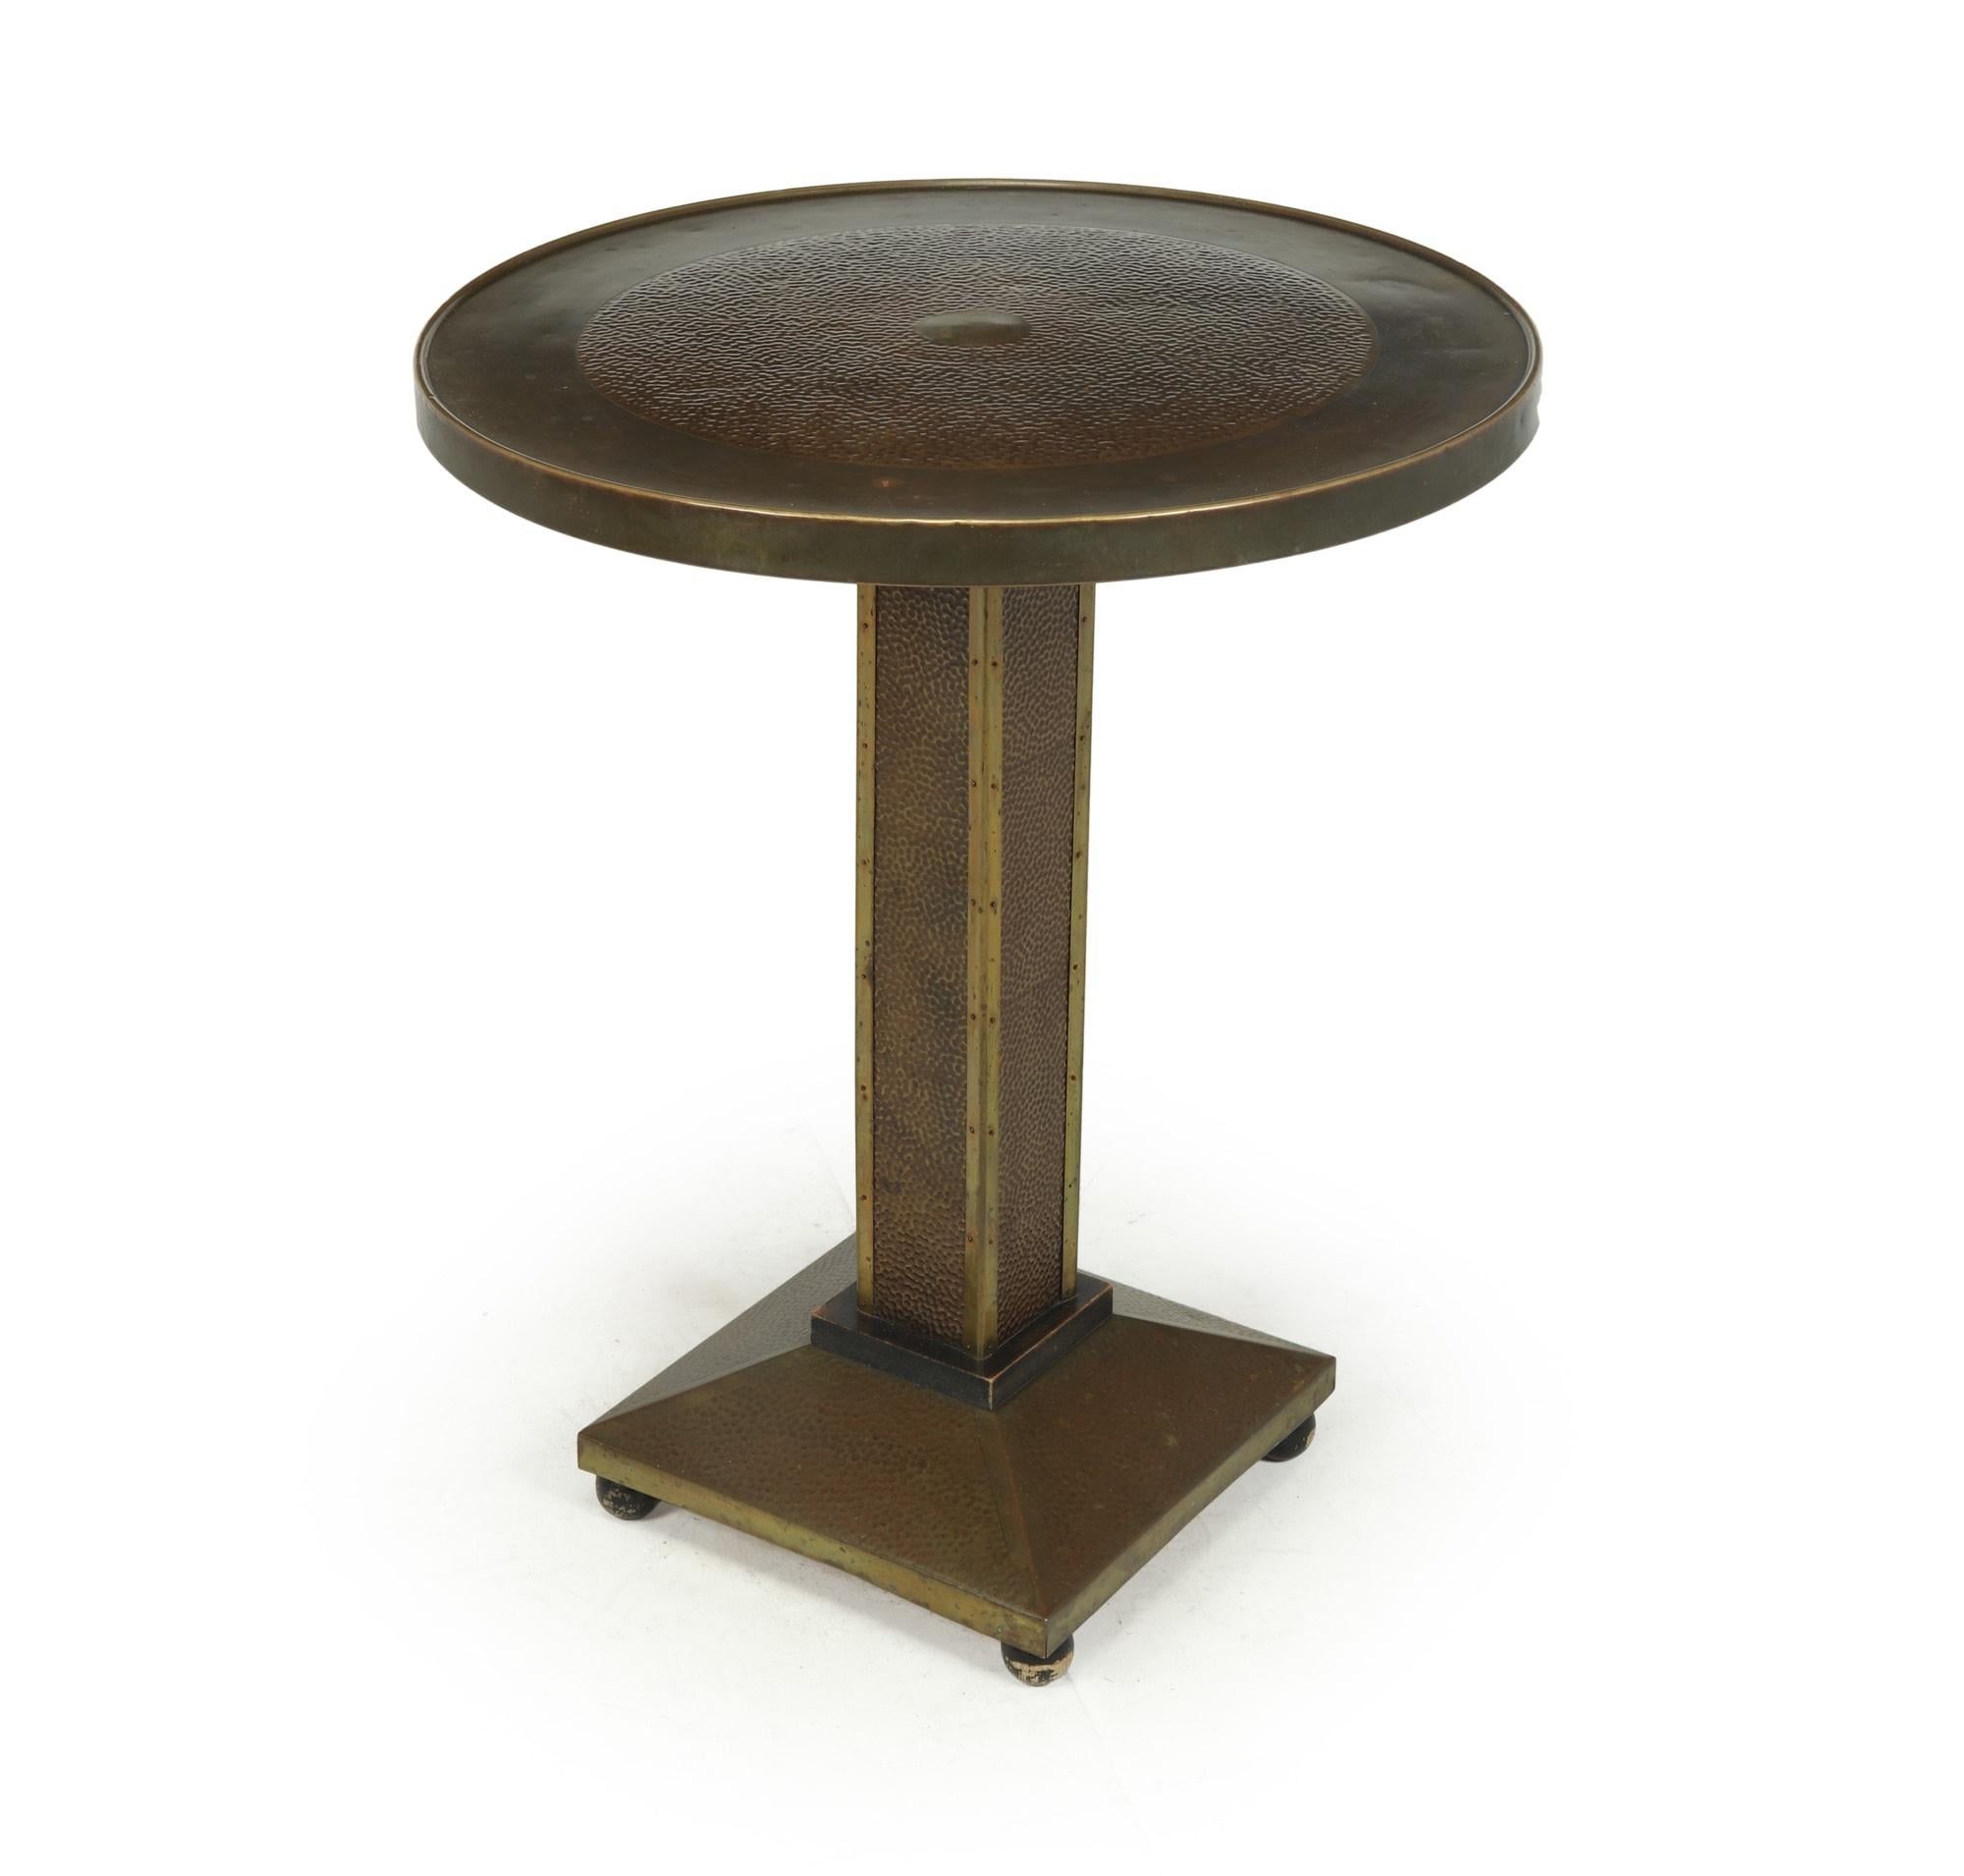 A lovely little super original 1930’s brass and copper wine table from the art deco period, circular beaten copper top with square upright on a sloped square base, retaining original patina and in excellent condition throughout with minor age